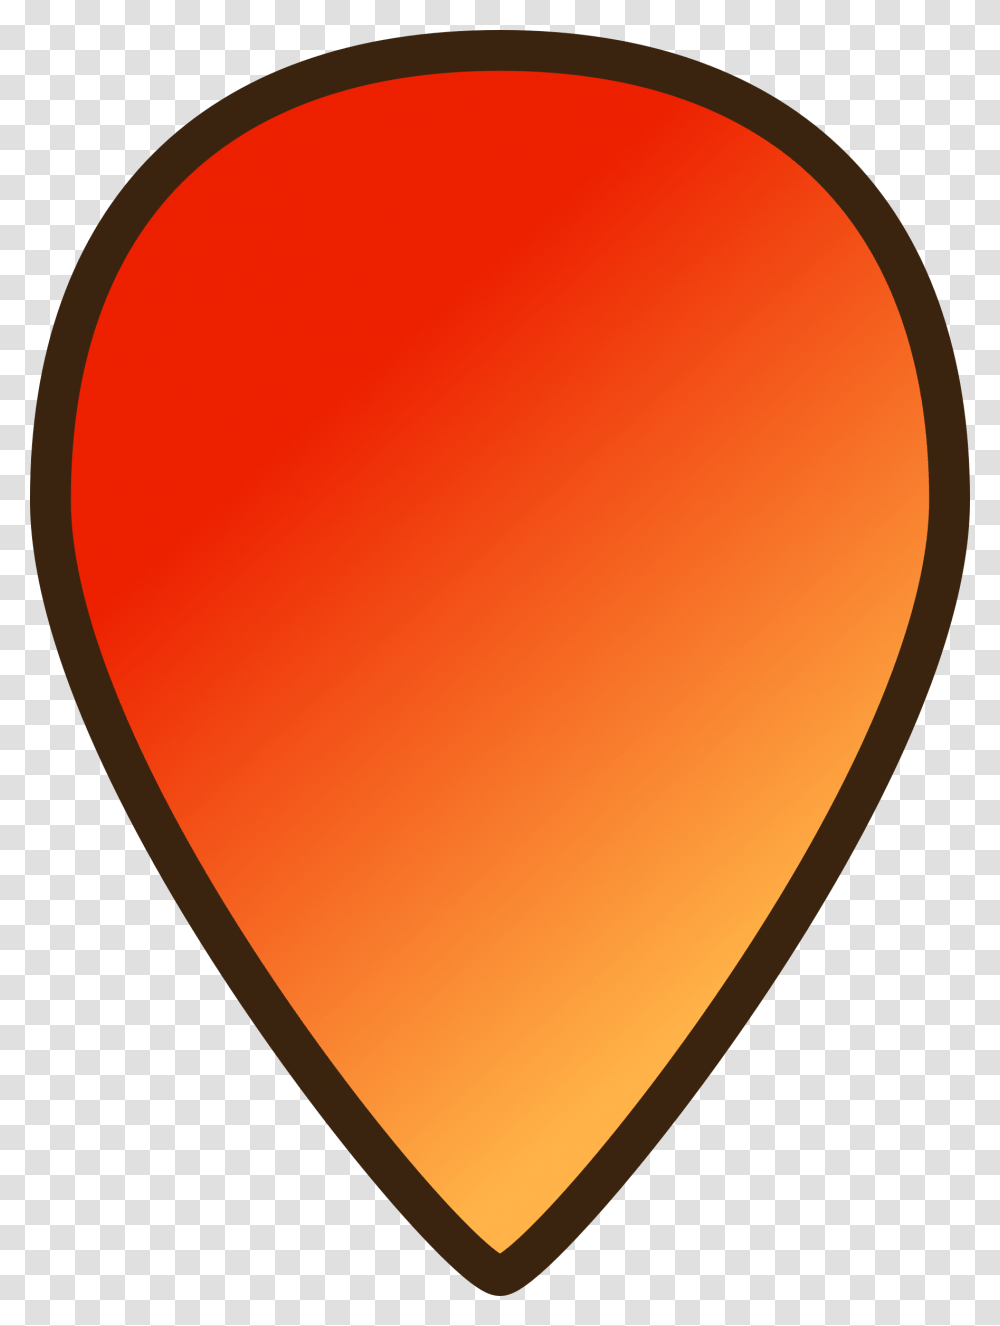 Map Location Marker Clip Arts Icon, Plectrum, Balloon, Glass Transparent Png